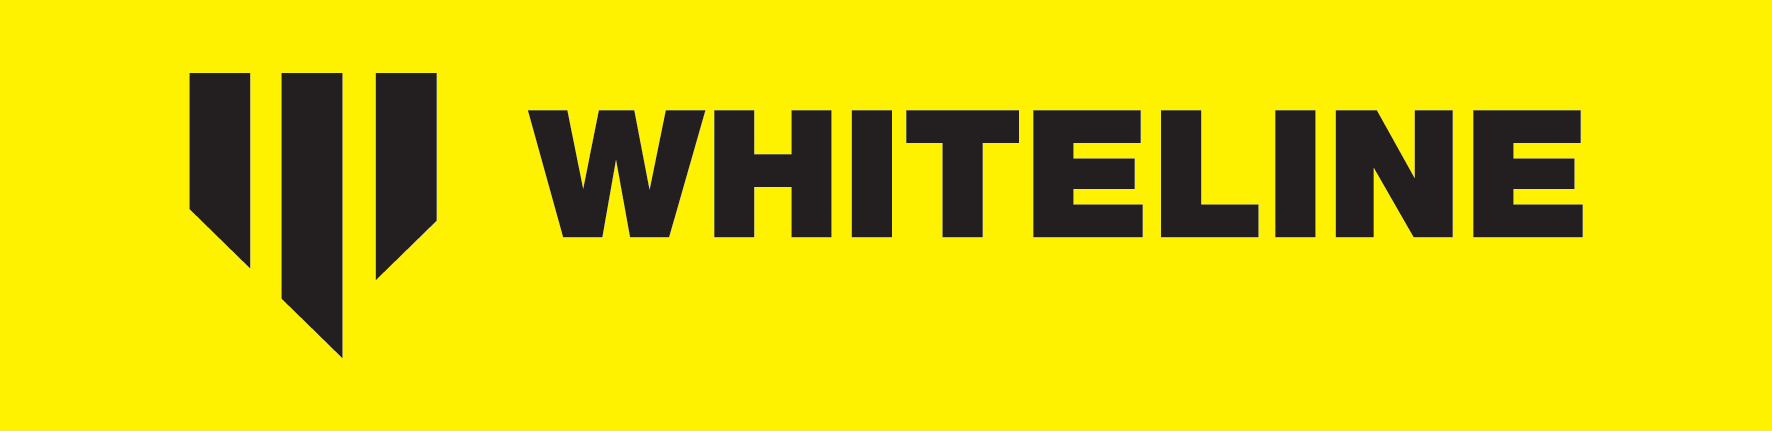 WH_logo_1_yellow.png